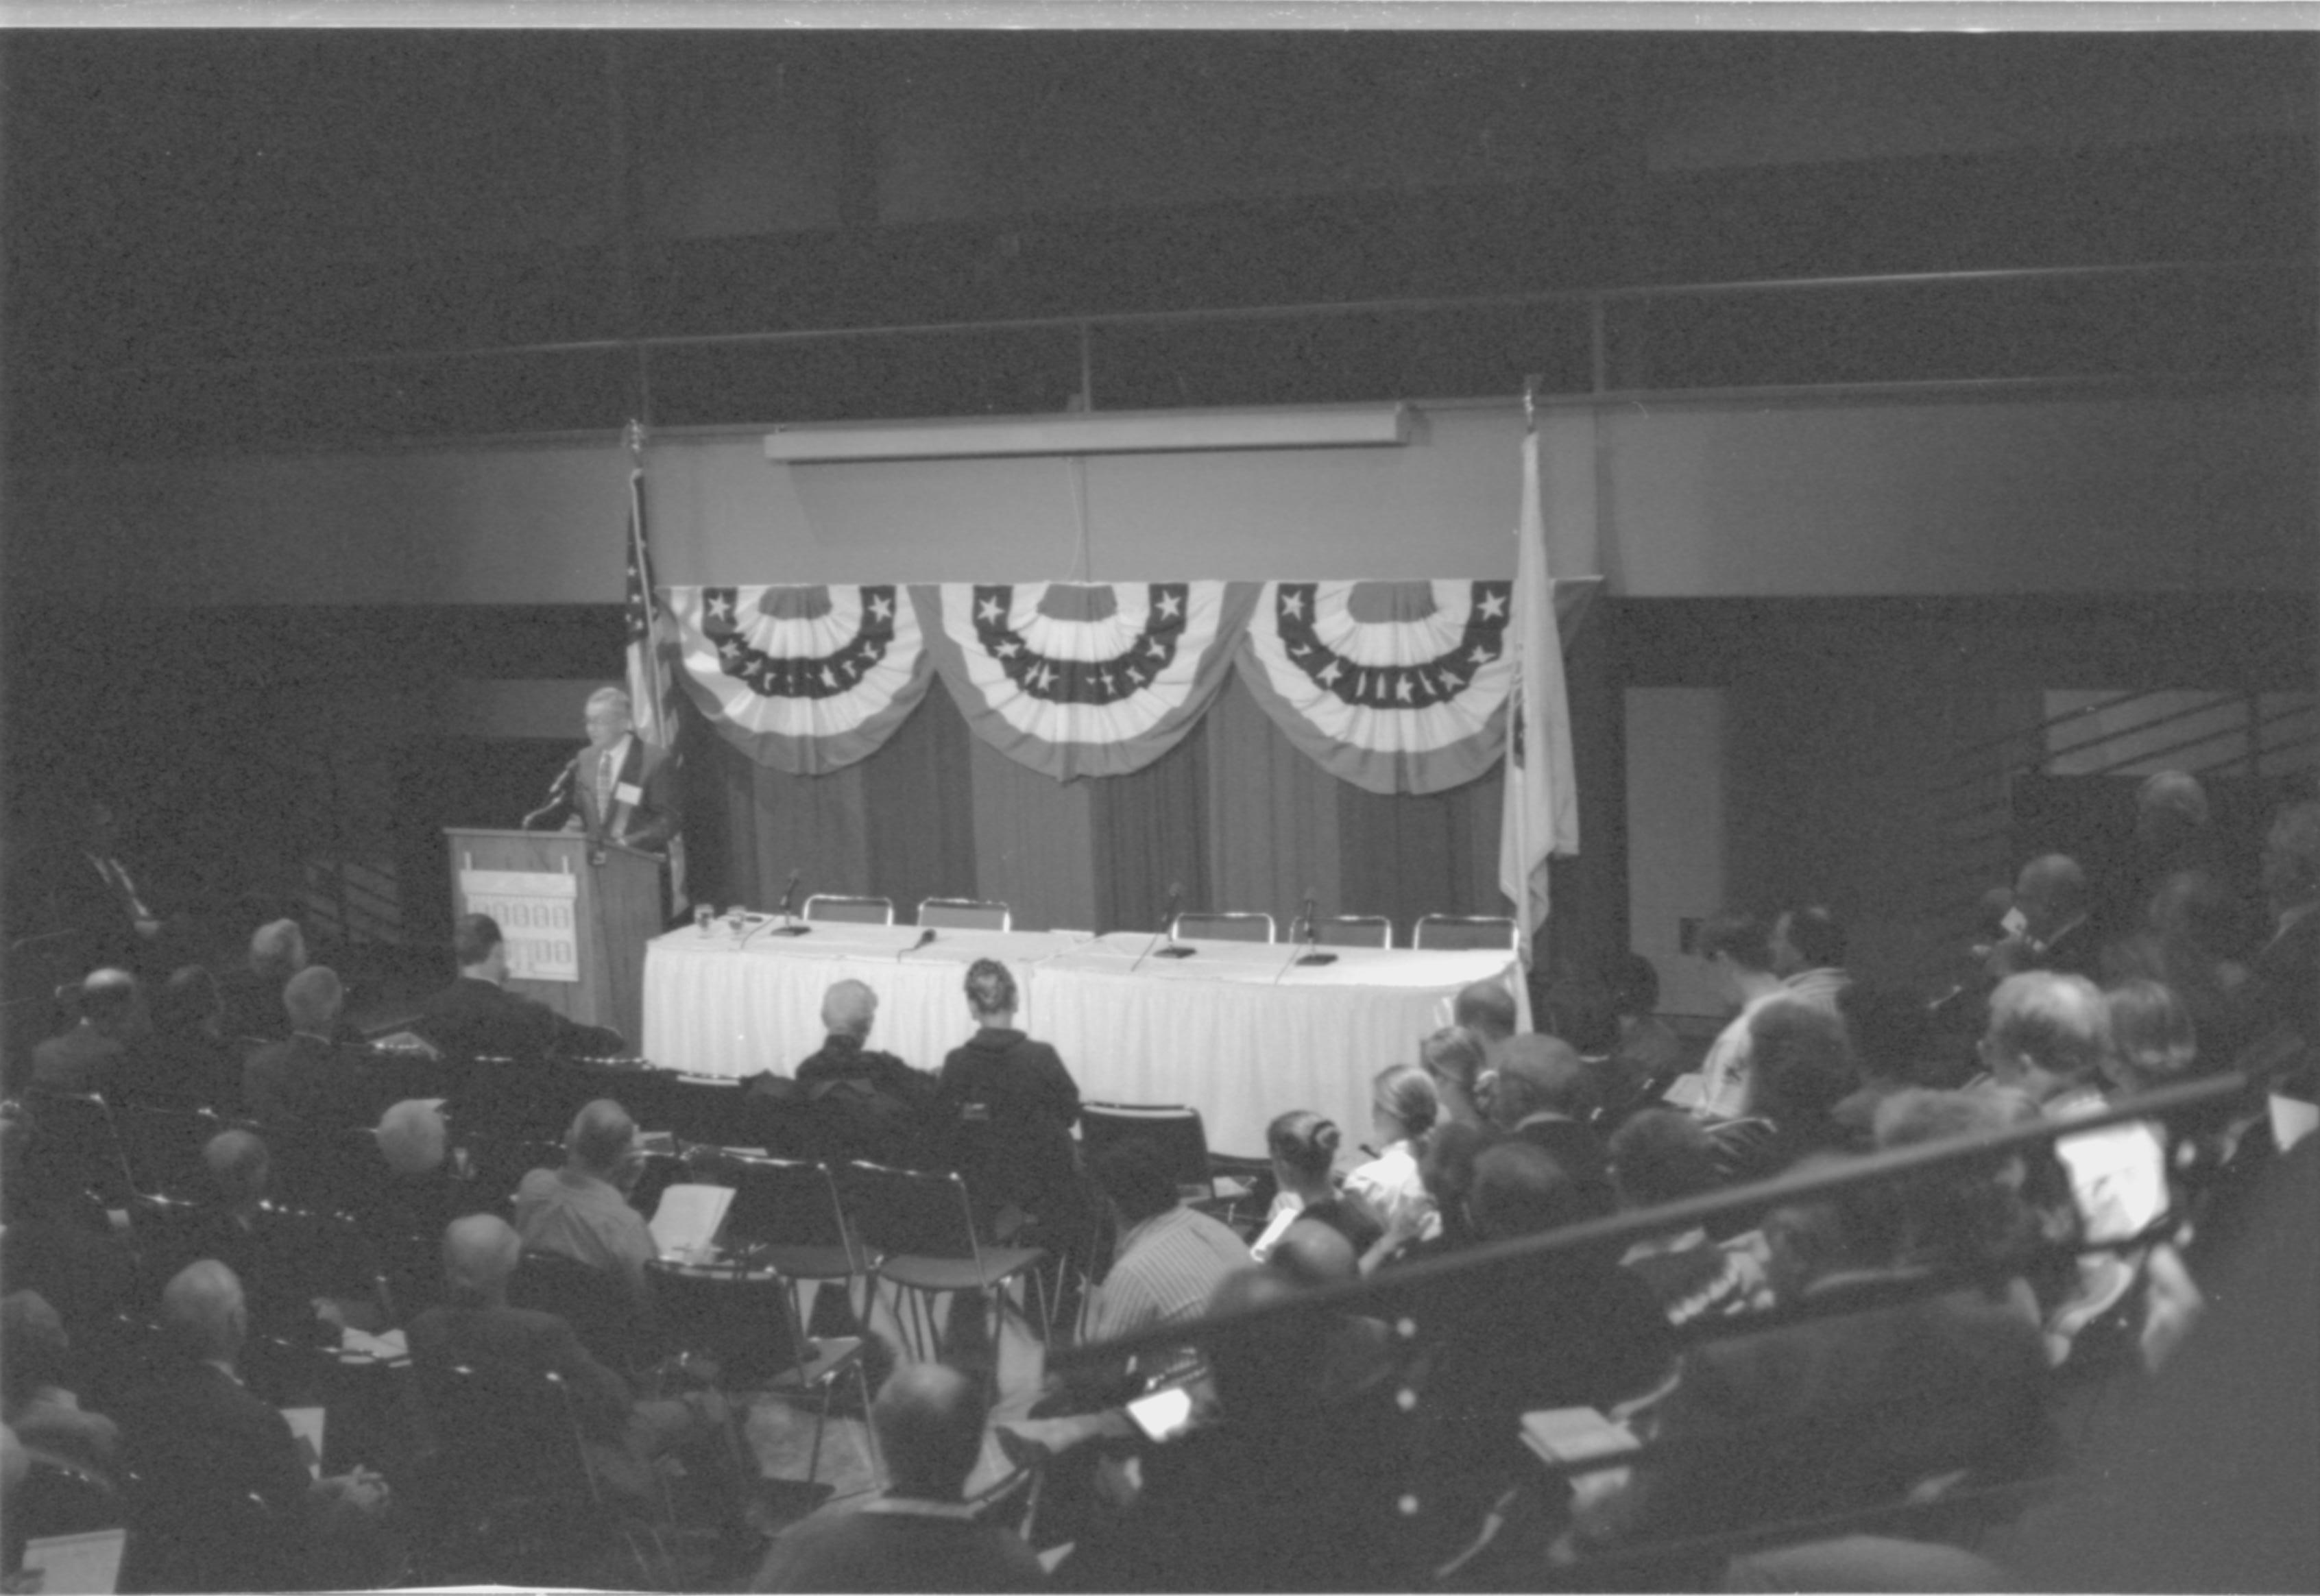 Lecture Hall and speakers table. 4-1997 Colloq (b/w); 24 Colloquium, 1997